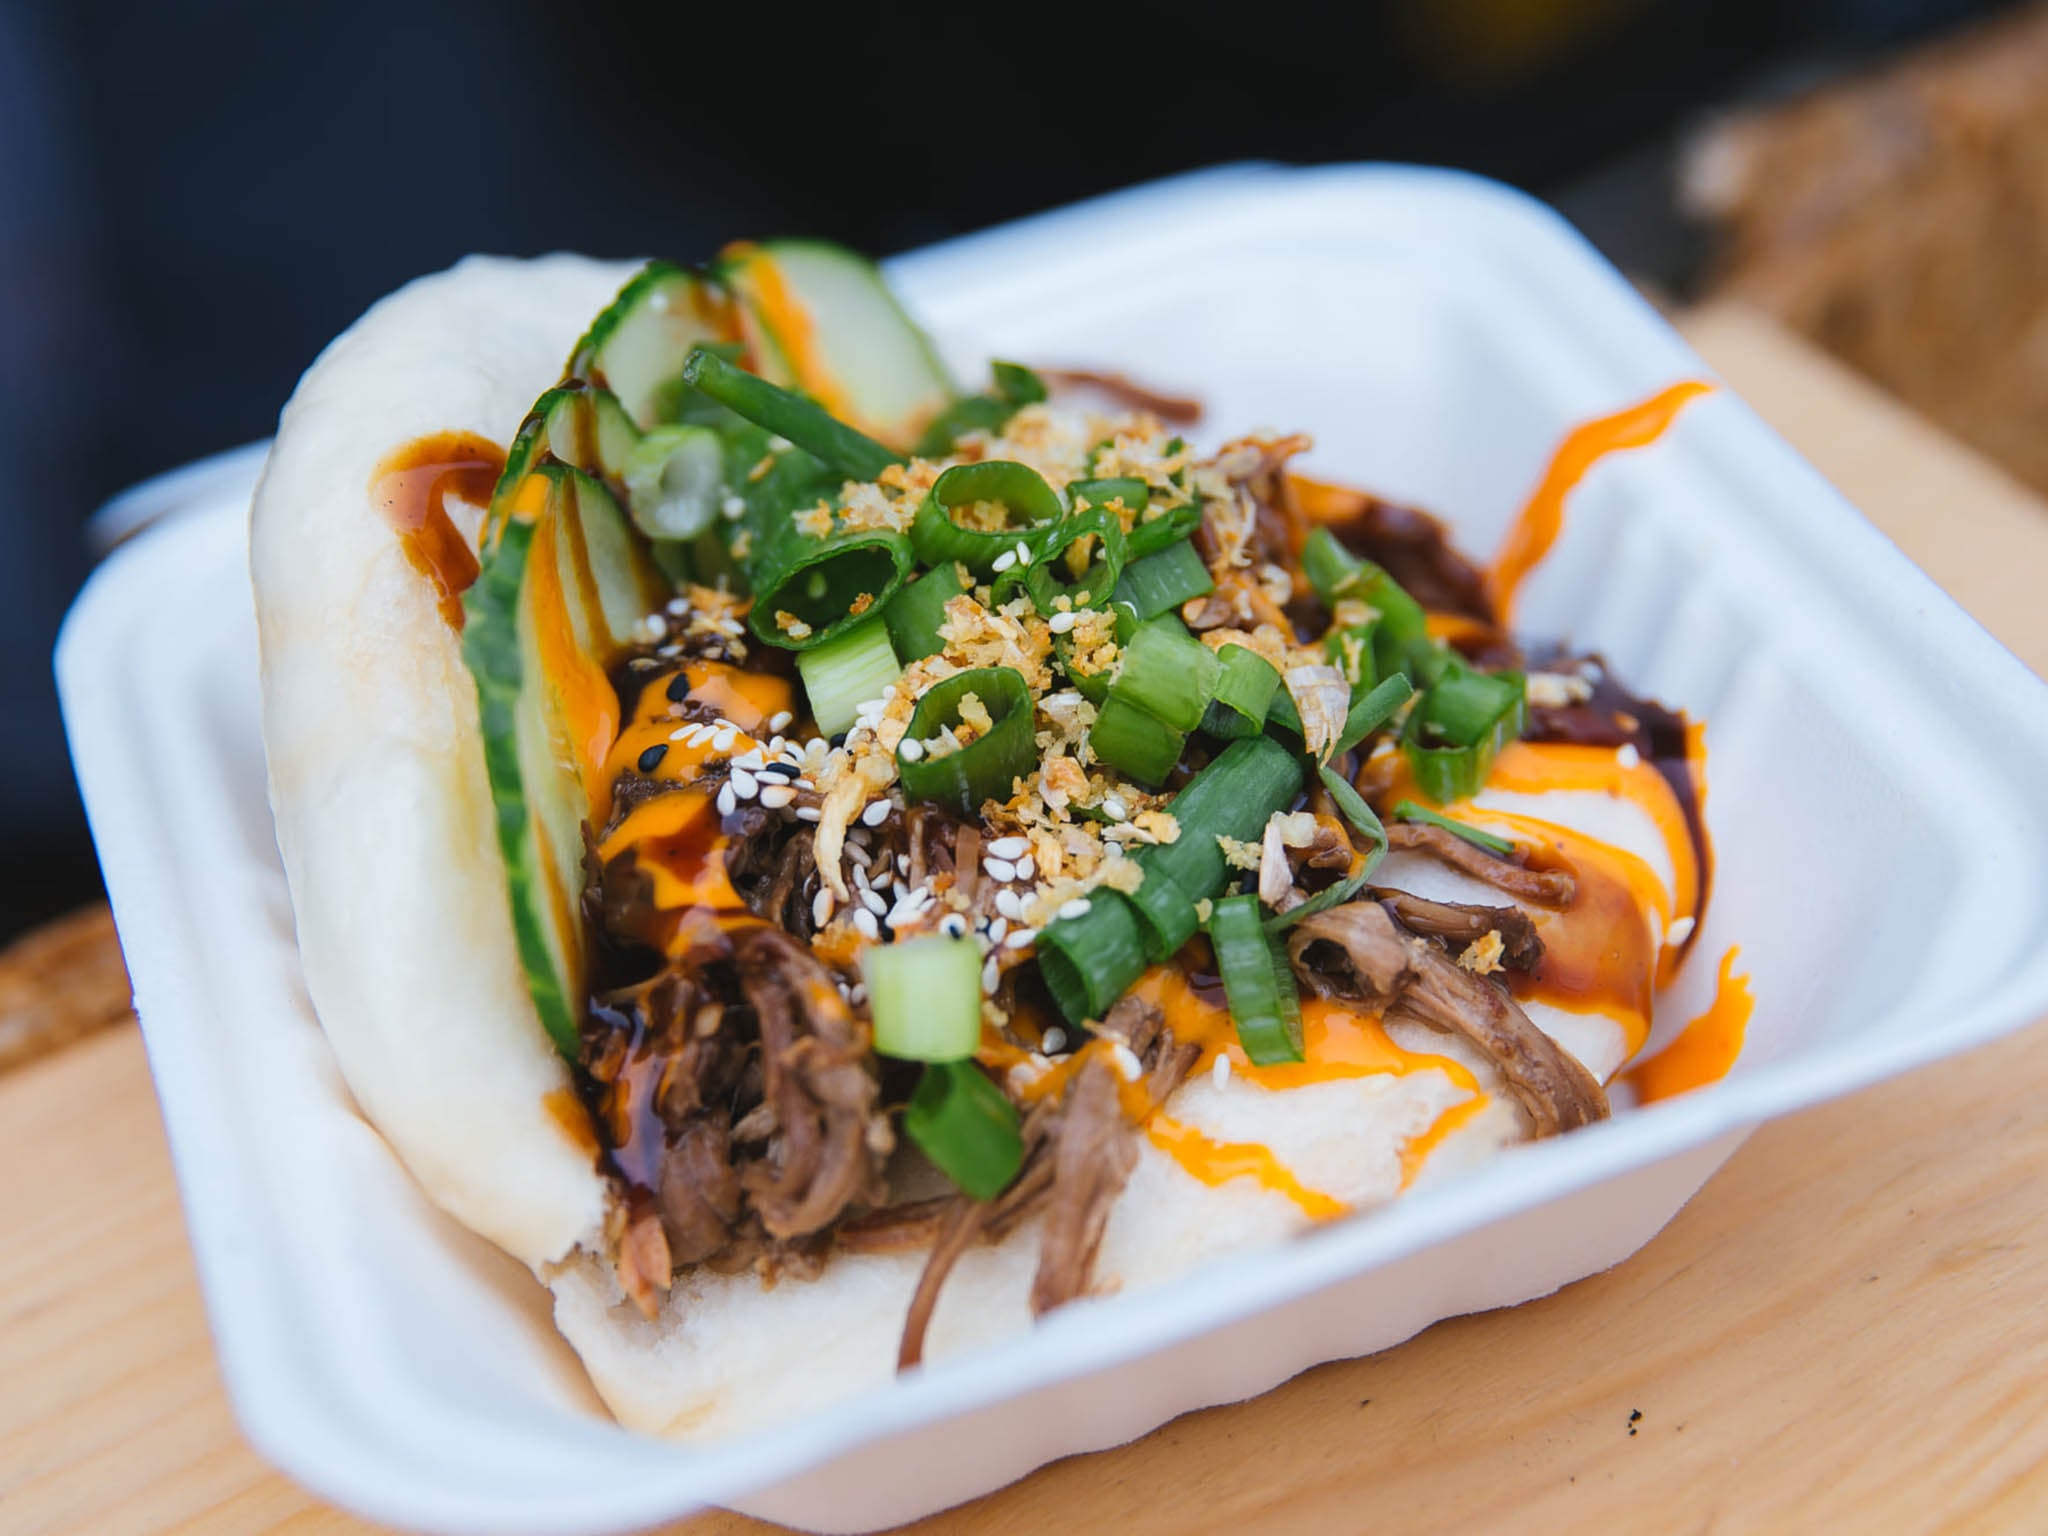 Bao buns from Bao Boy’s and halloumi fries are go-to dishes here